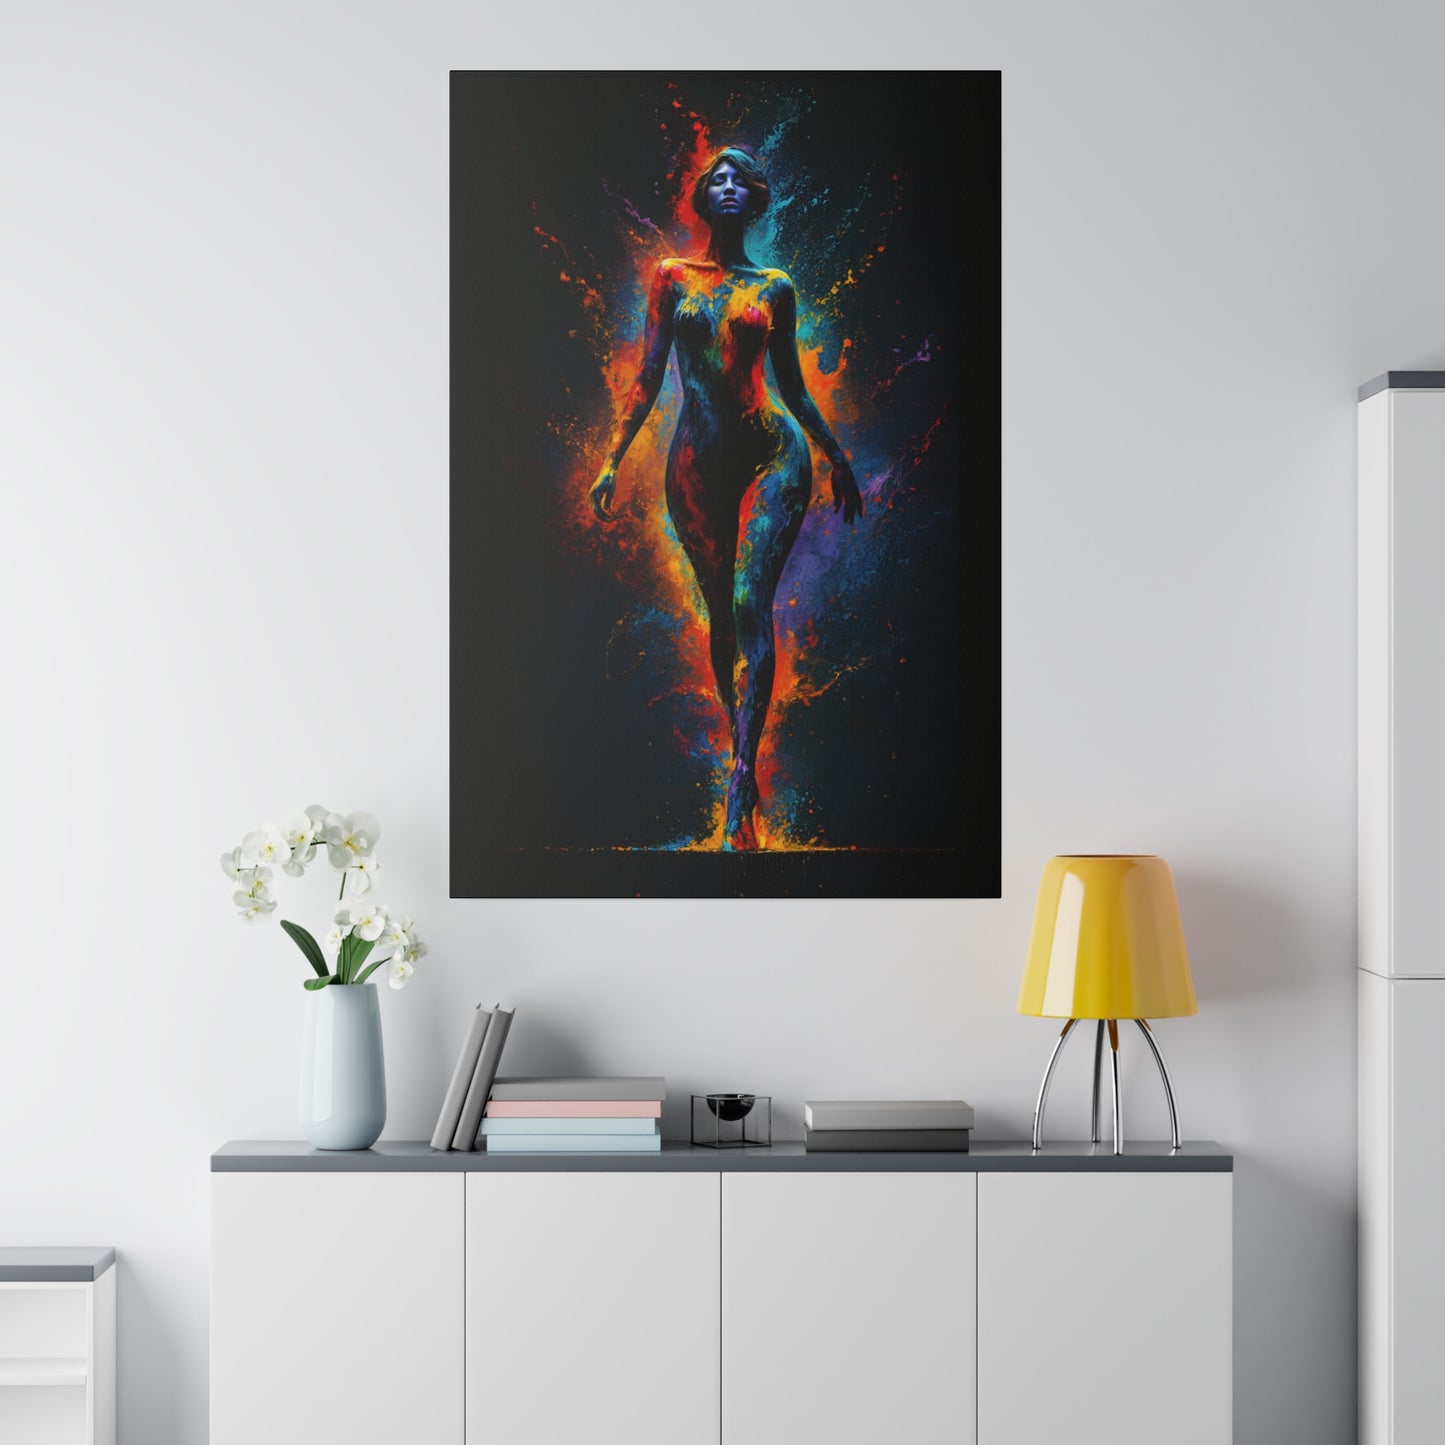 Cosmic Essence Abstract Art, Vivid Spectrum Body Form, Dynamic Color Explosion Canvas Print, Ethereal Female Silhouette Wall Art